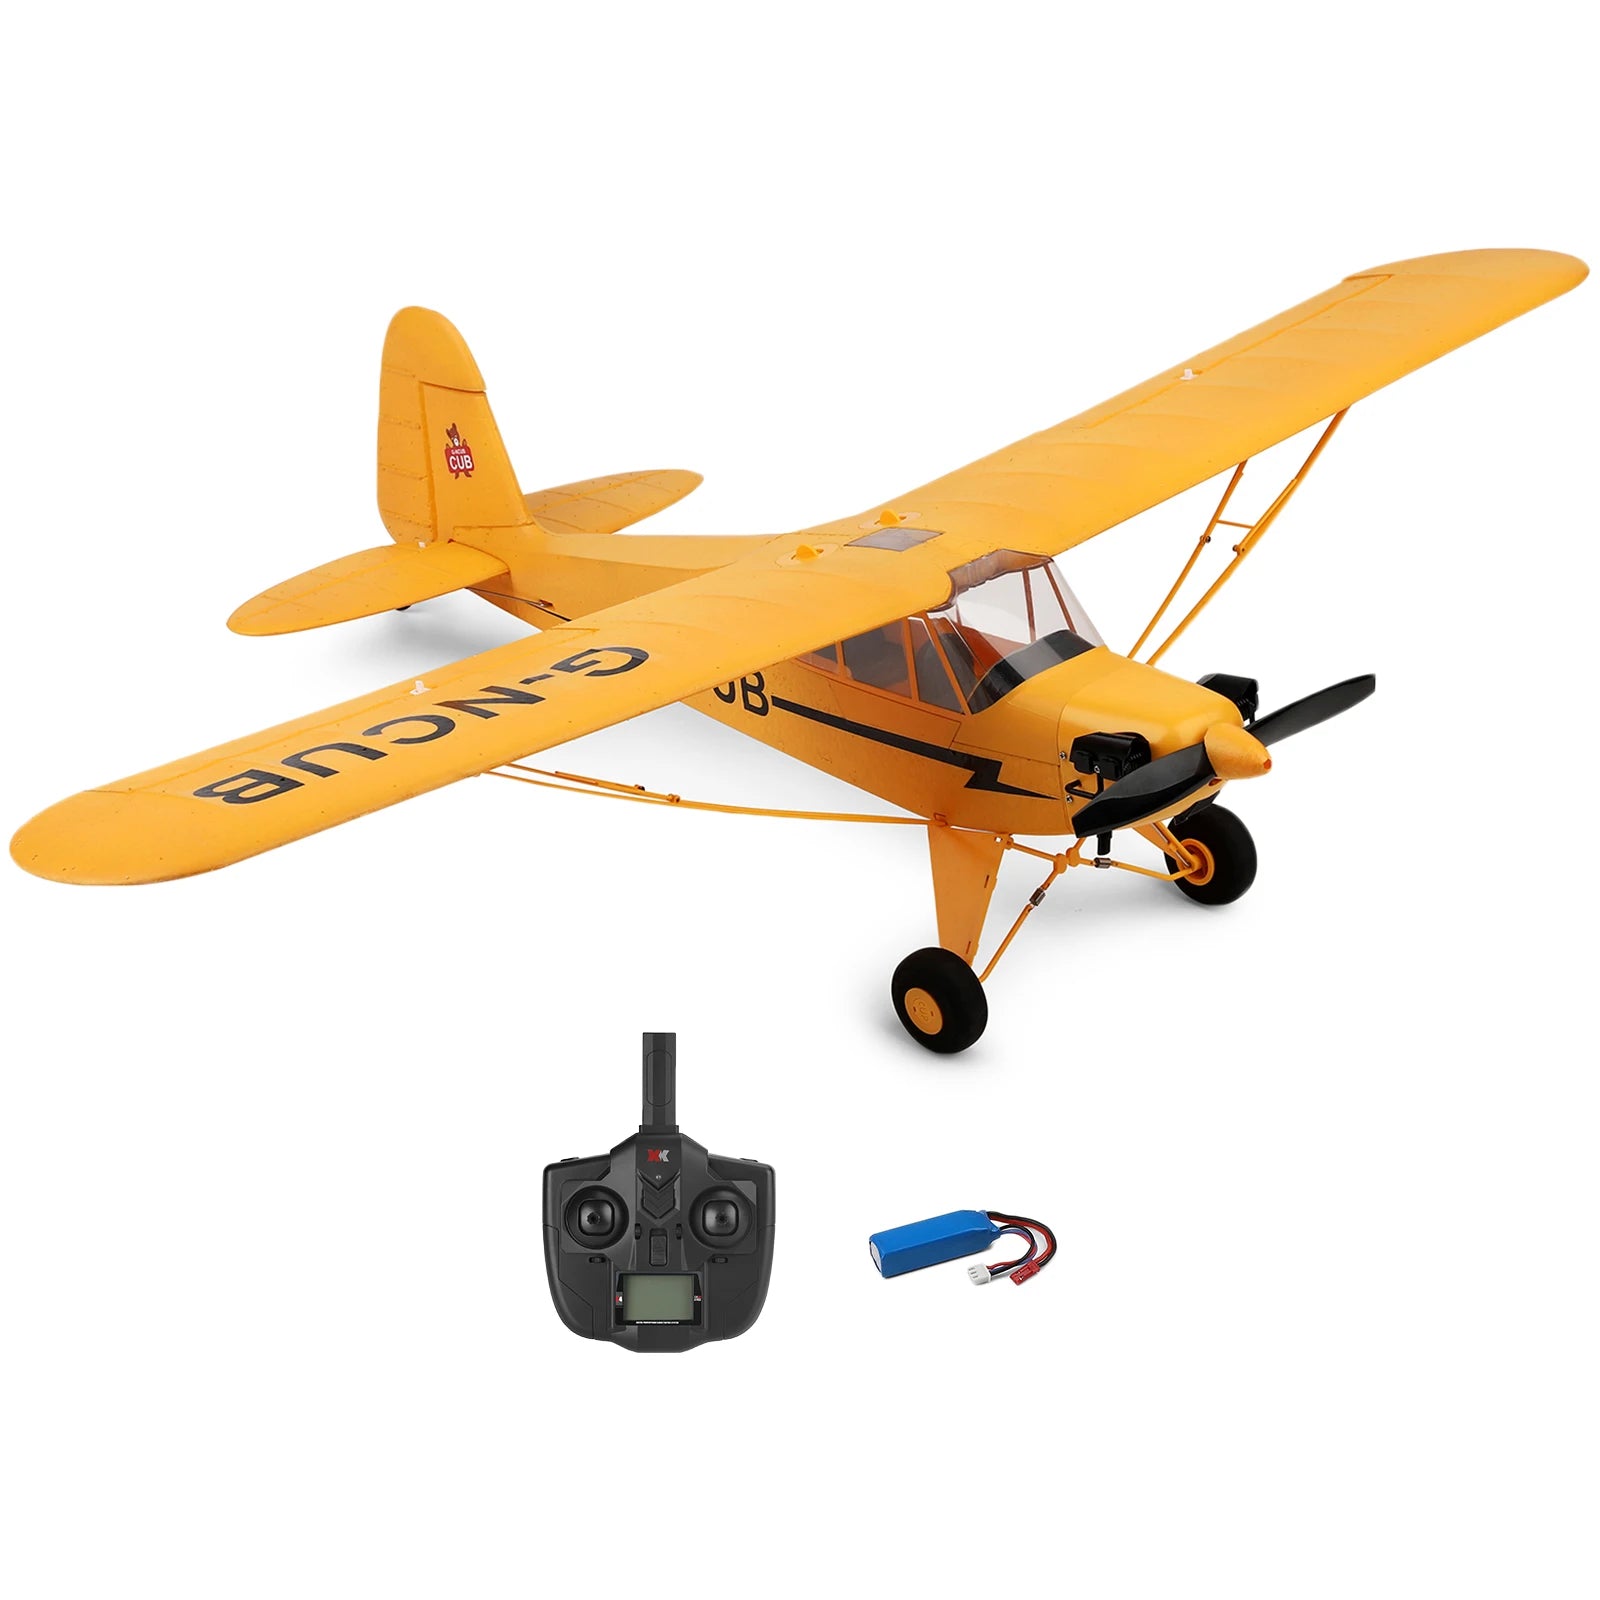 A160 RC Airplane, built-in six-axis gyroscope flight stabilization system, route